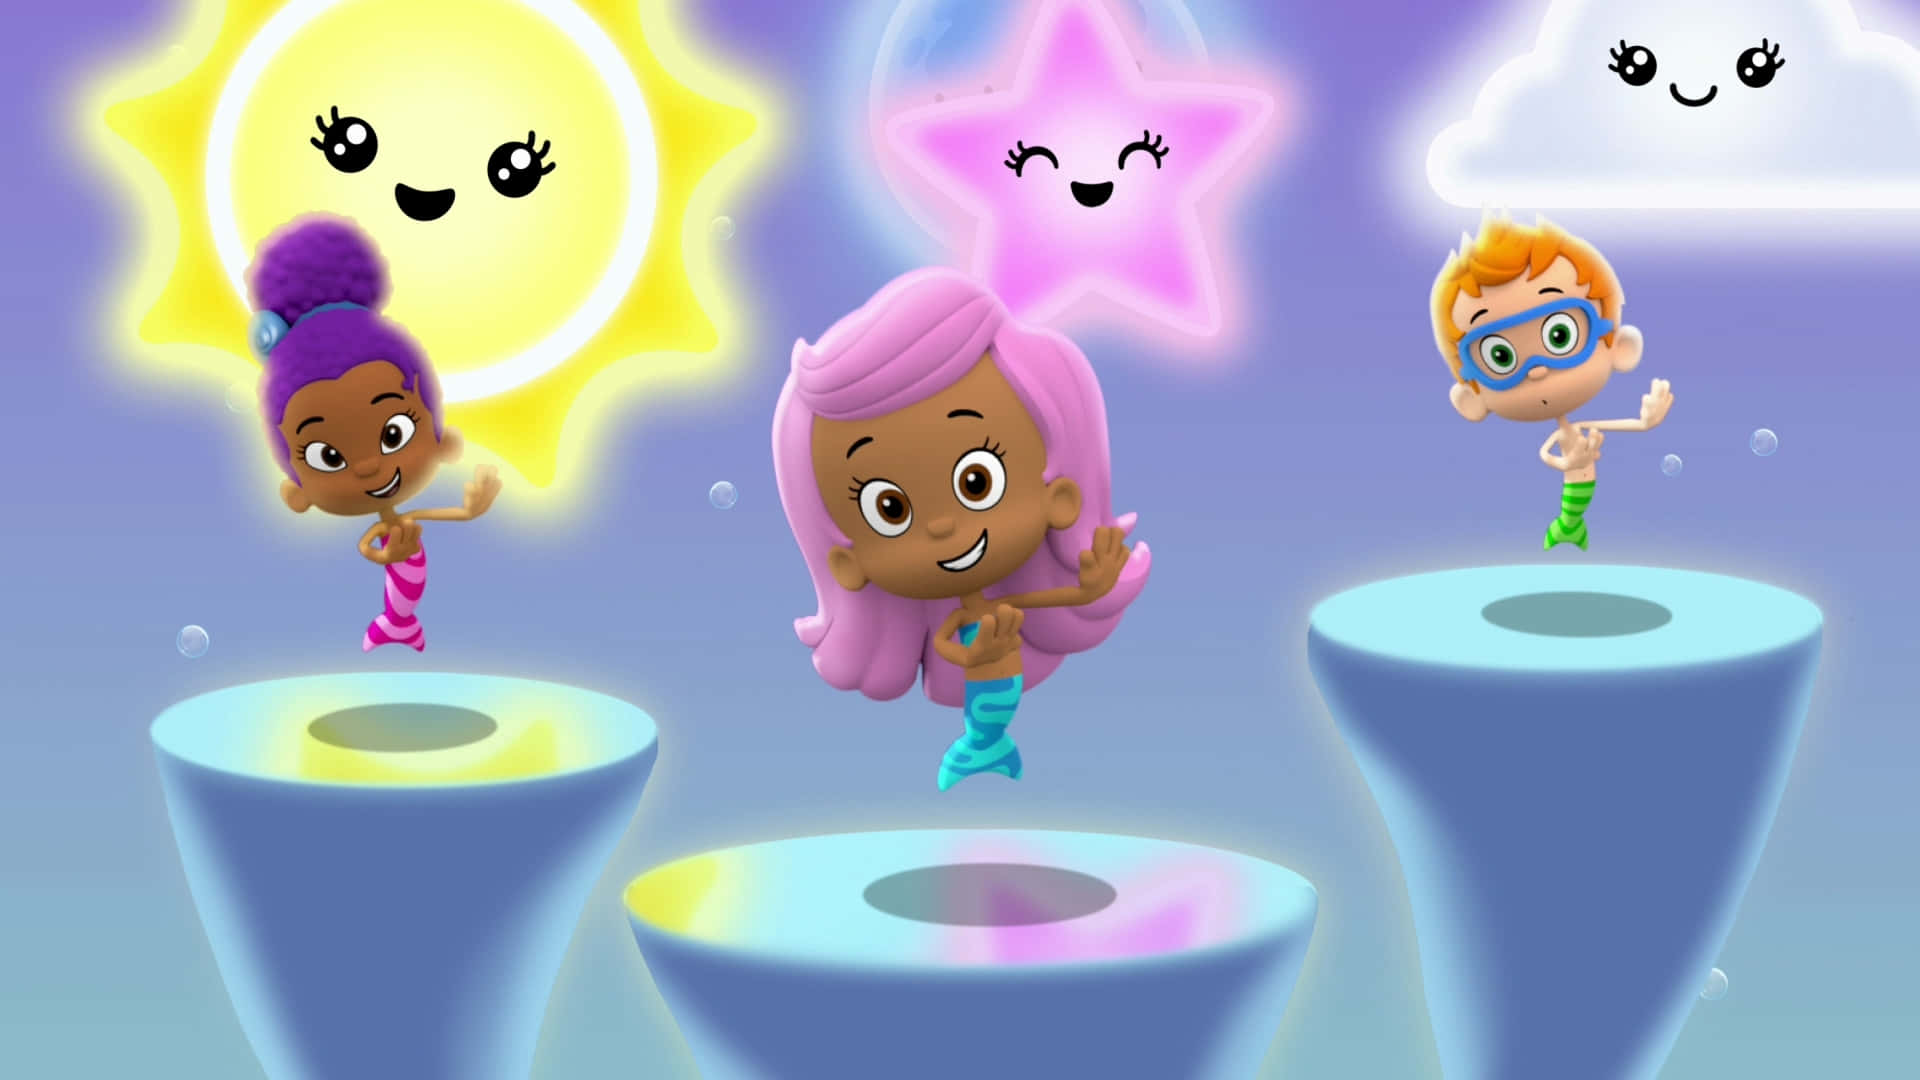 "Fun with Bubble Guppies!"